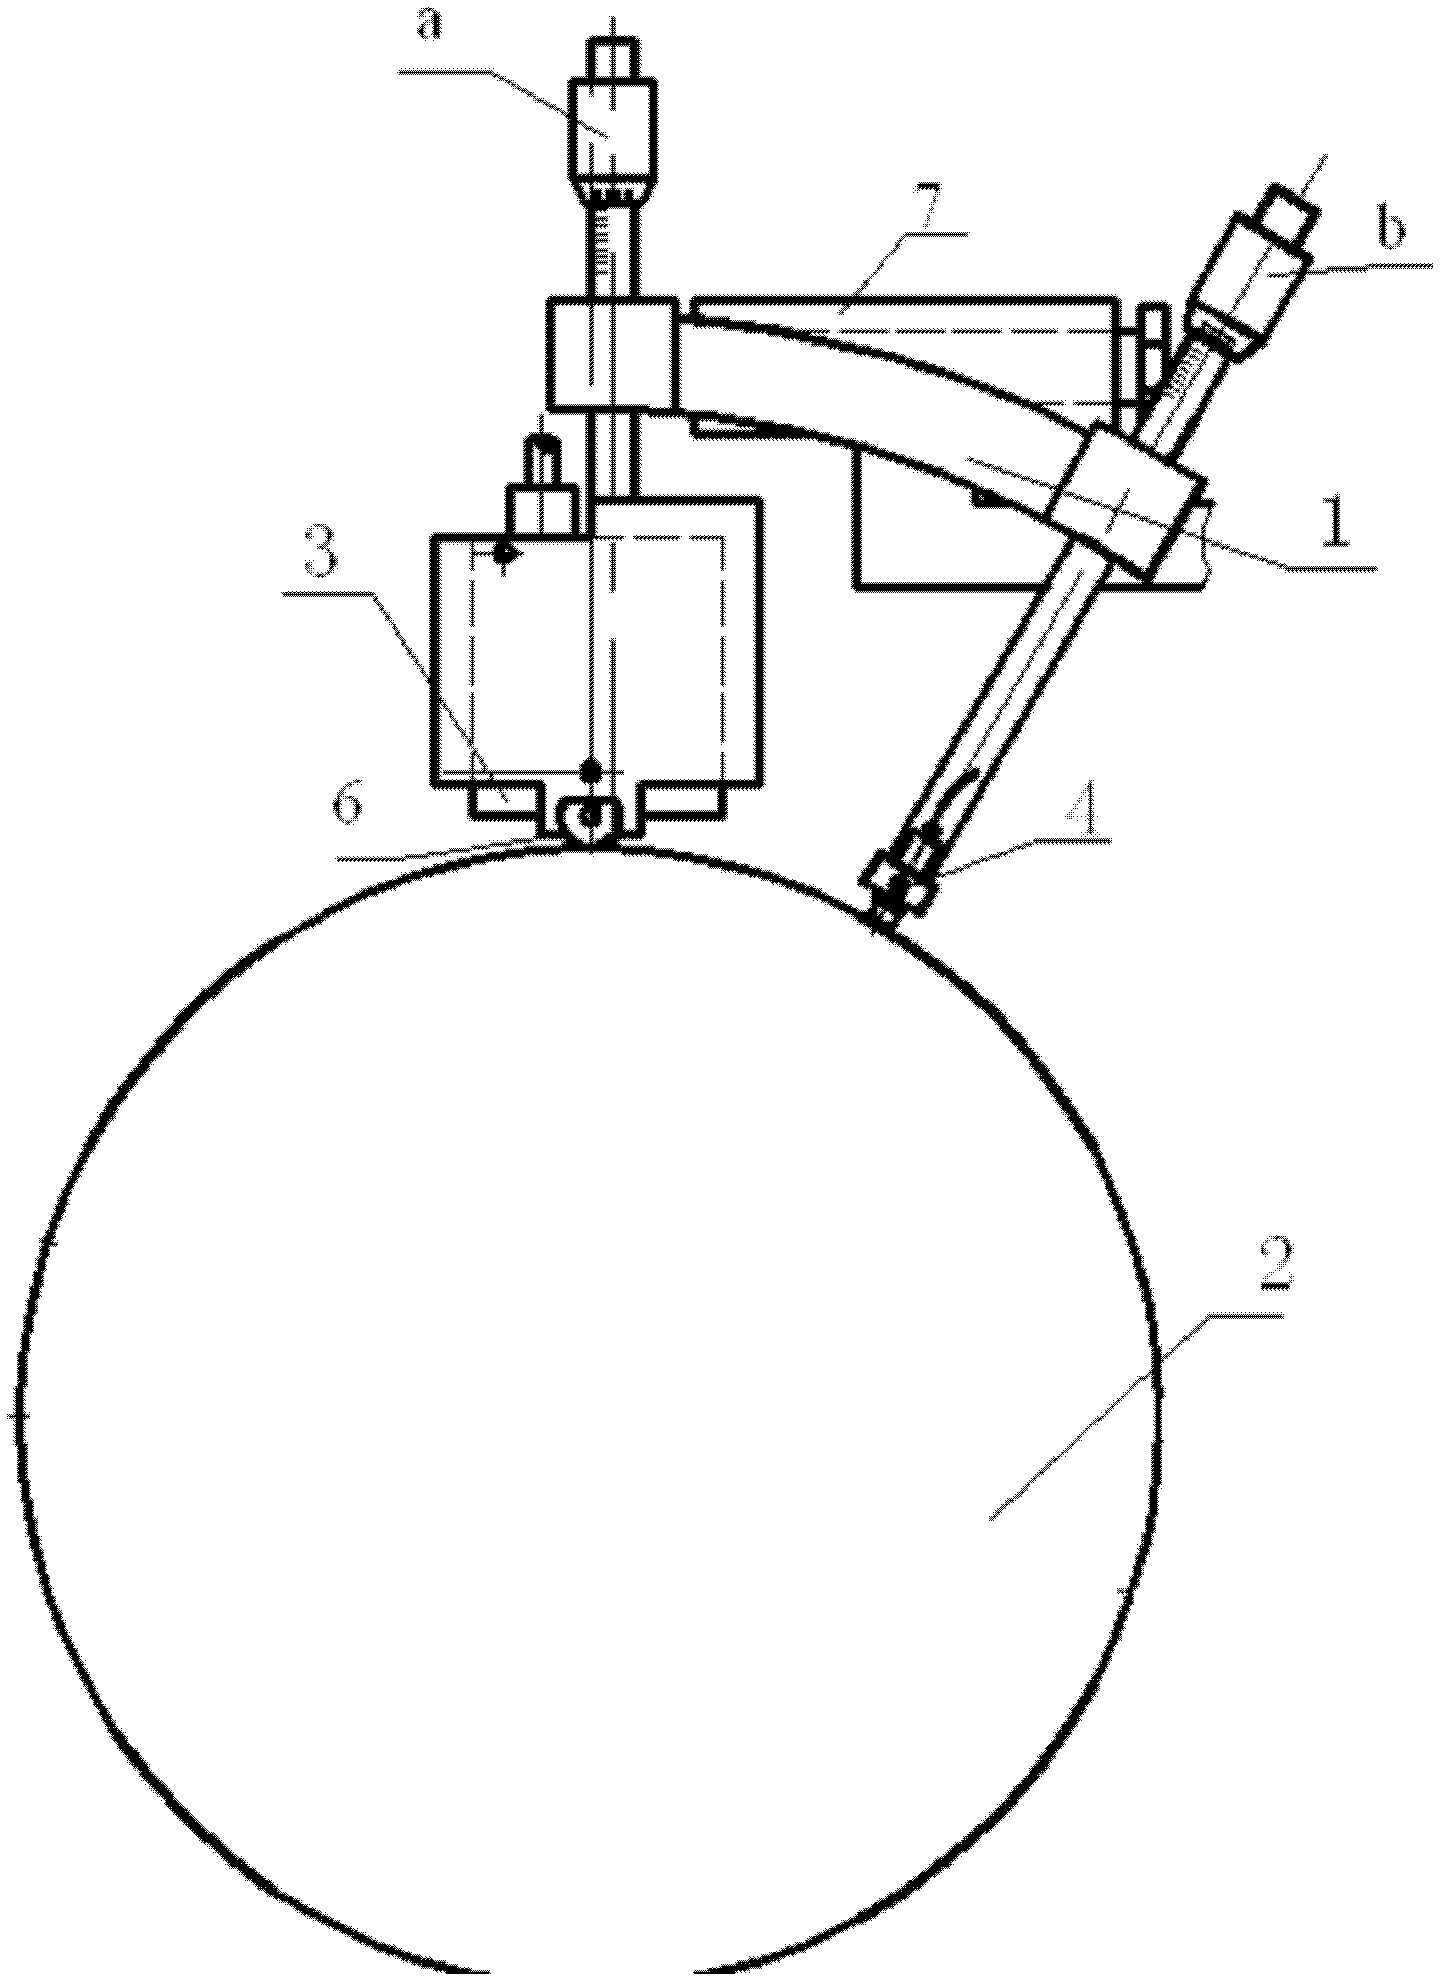 Measuring system for electrical runout amount of revolving body